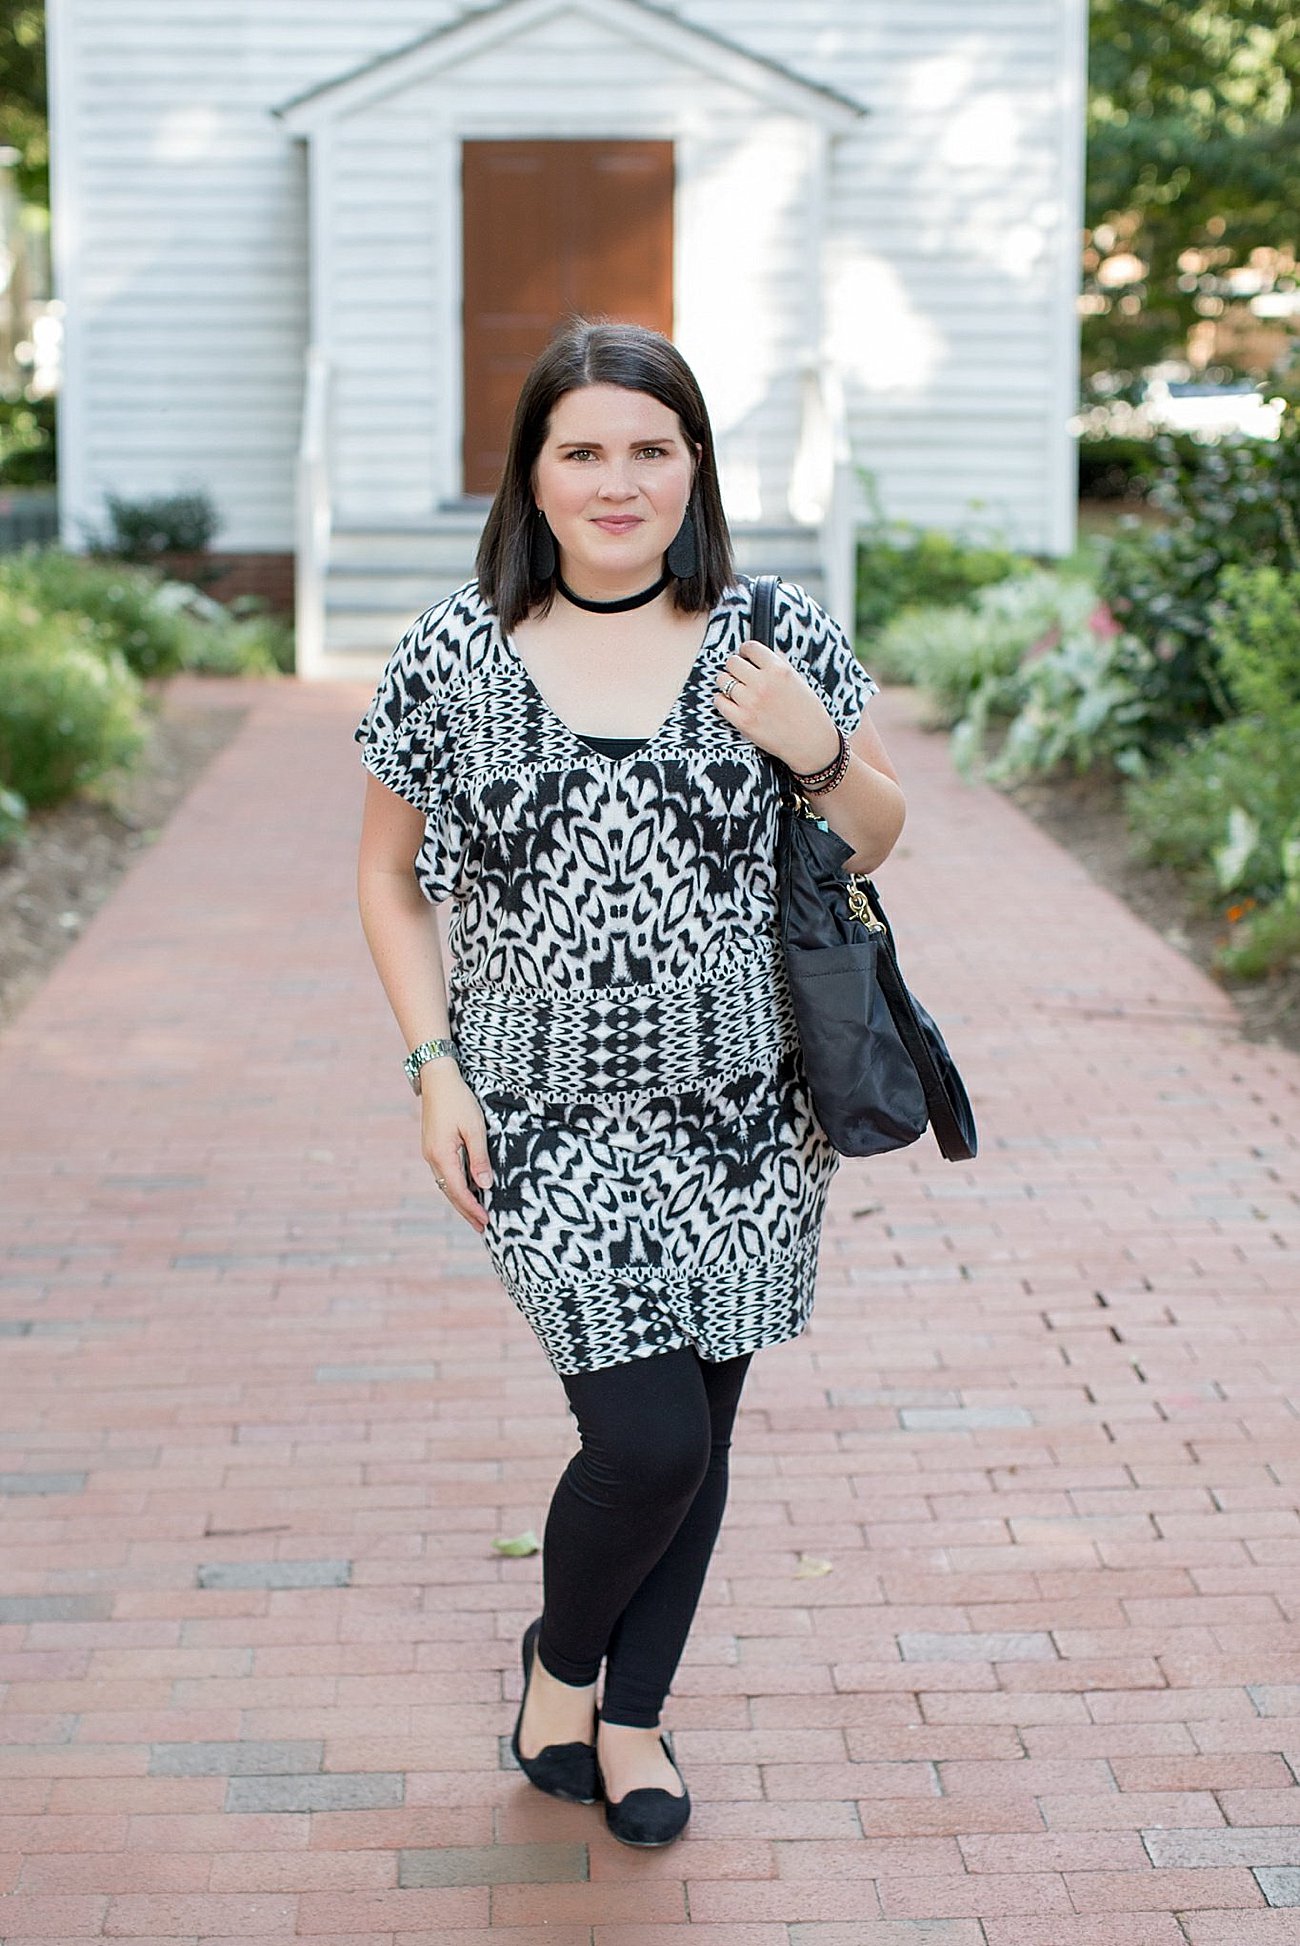 Threads for Thought "Mia Dress", LulaRoe black leggings, Lily Jade diaper bag, Nickel & Suede choker, Nickel & Suede earrings, Darzah stitched leather cuff | ethical fashion blogger, north carolina fashion blogger (13)